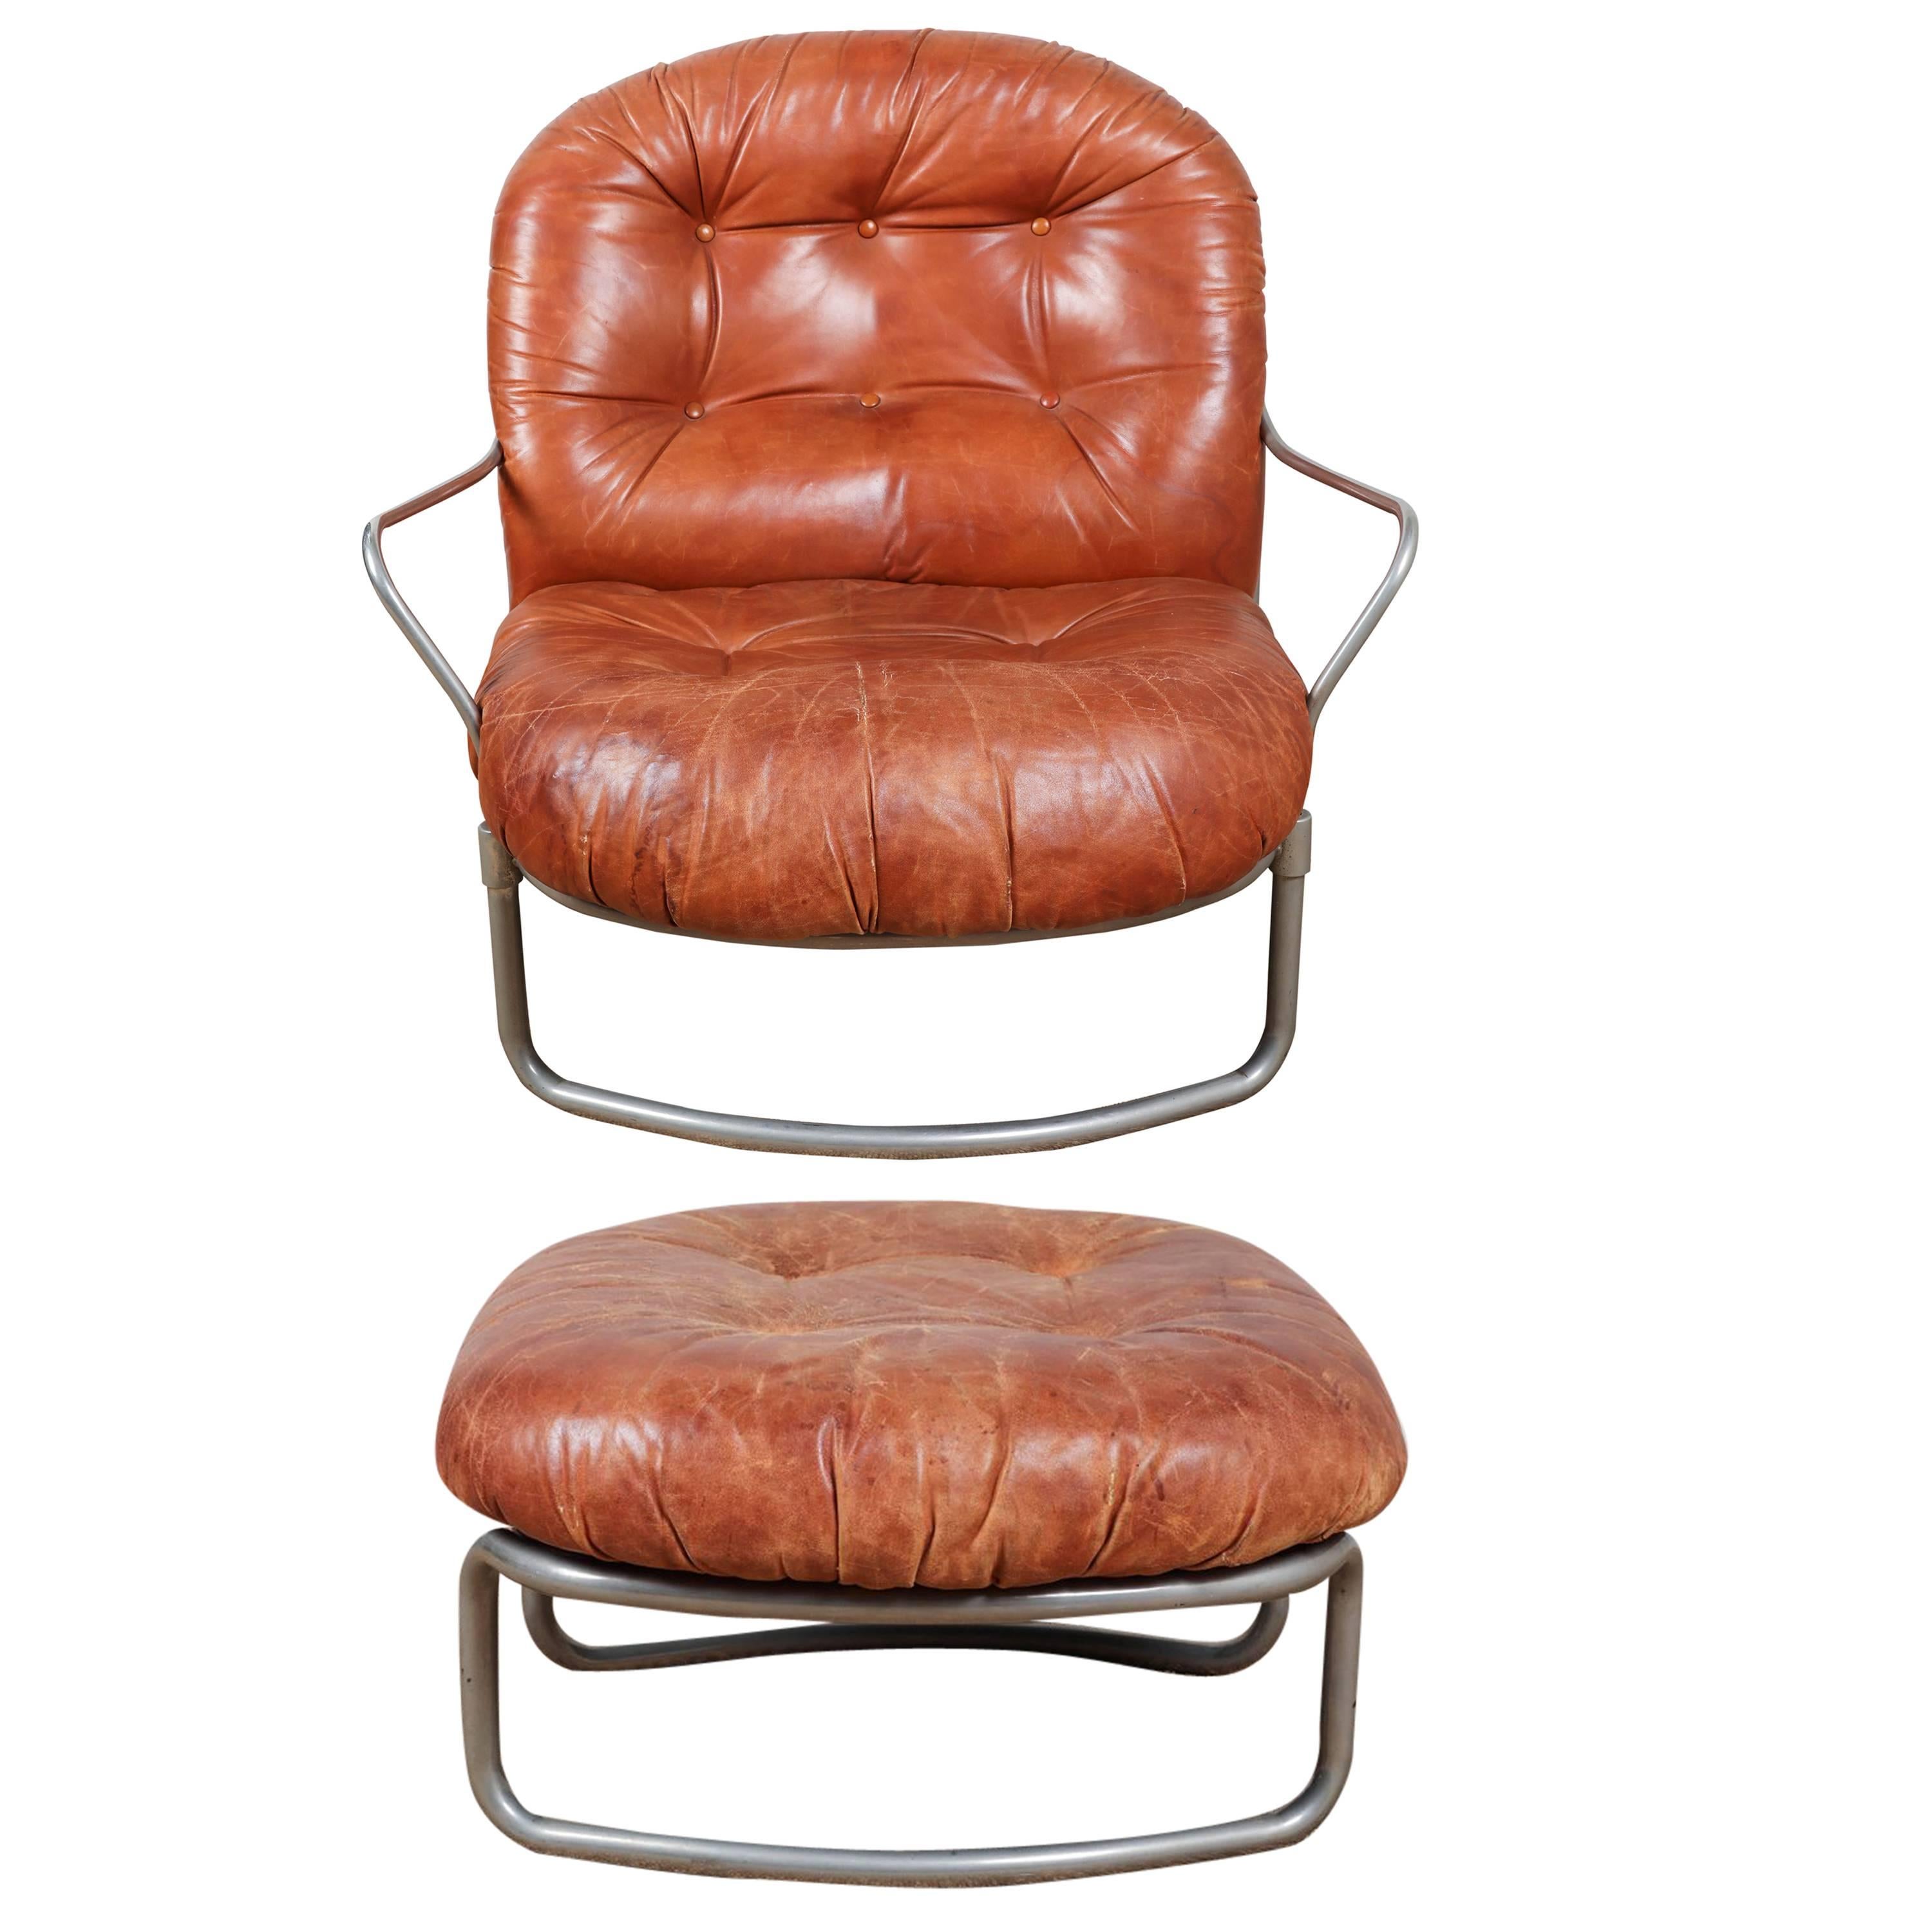 Distressed leather (no rips) and chrome chair and ottoman (25 W x 25 D x 14 H).   Offered by .  